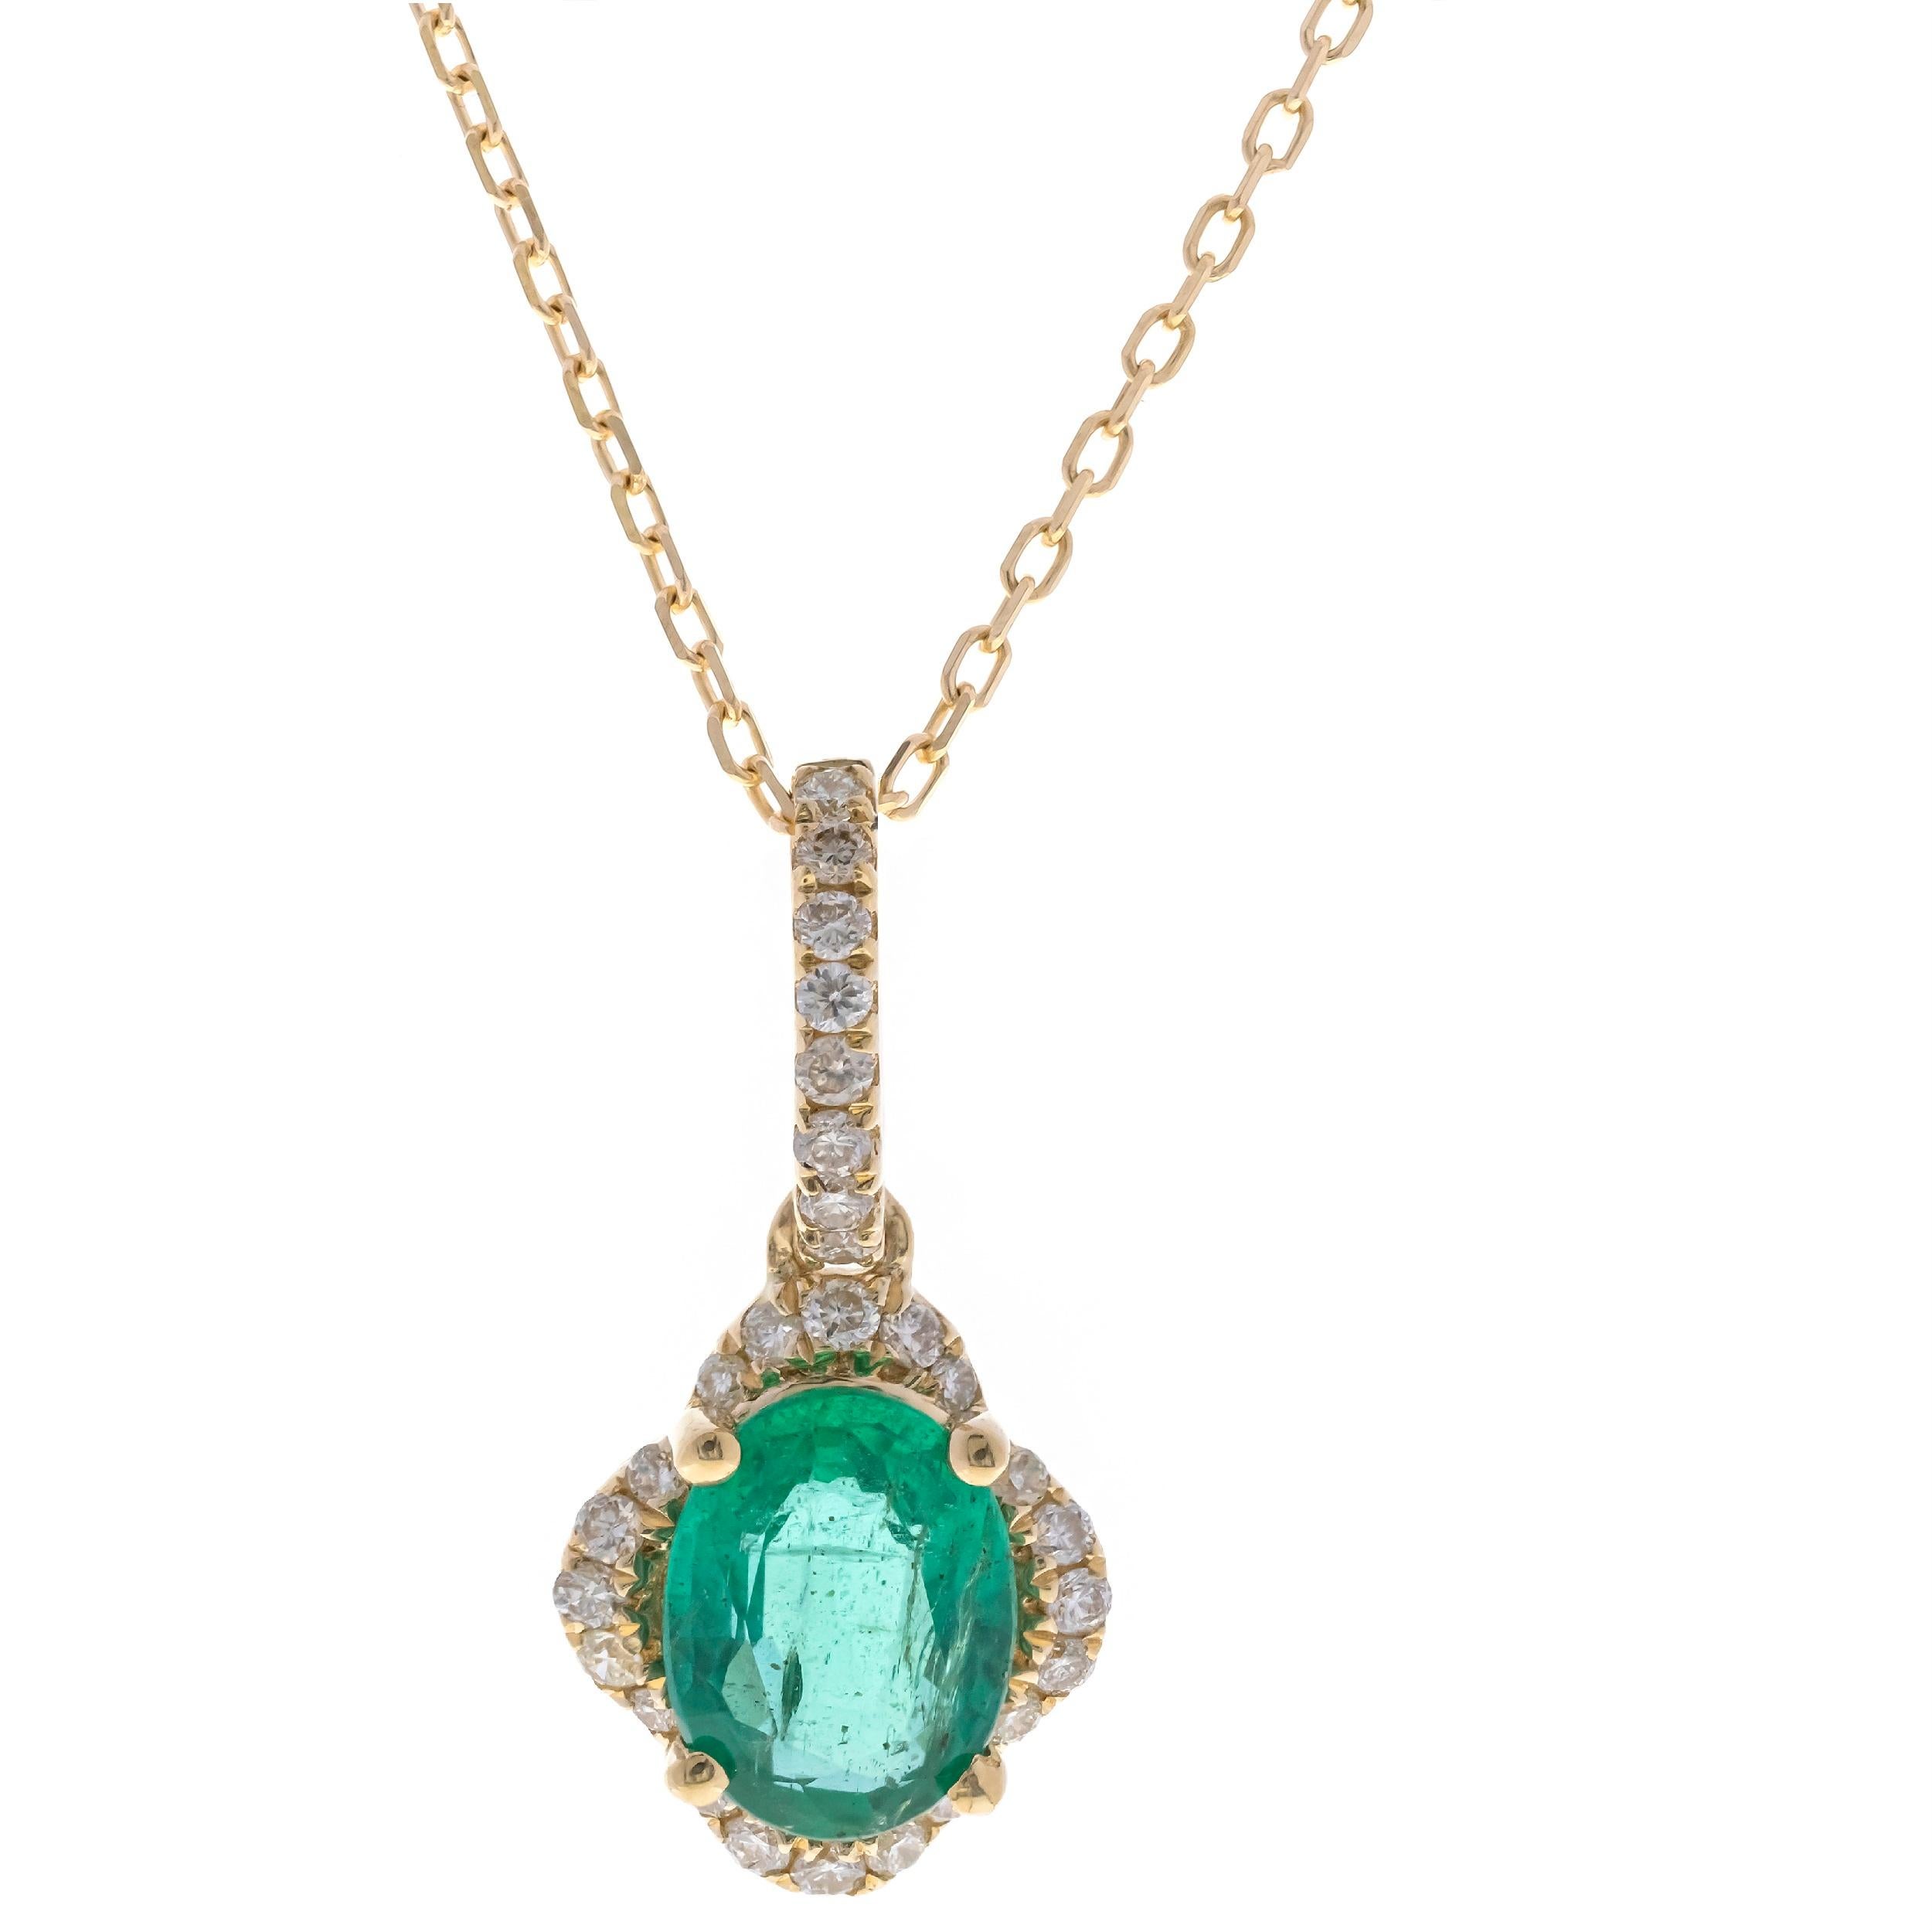 0.69 Carat Oval-Cut Emerald with Diamond Accents 14K Yellow Gold Pendant